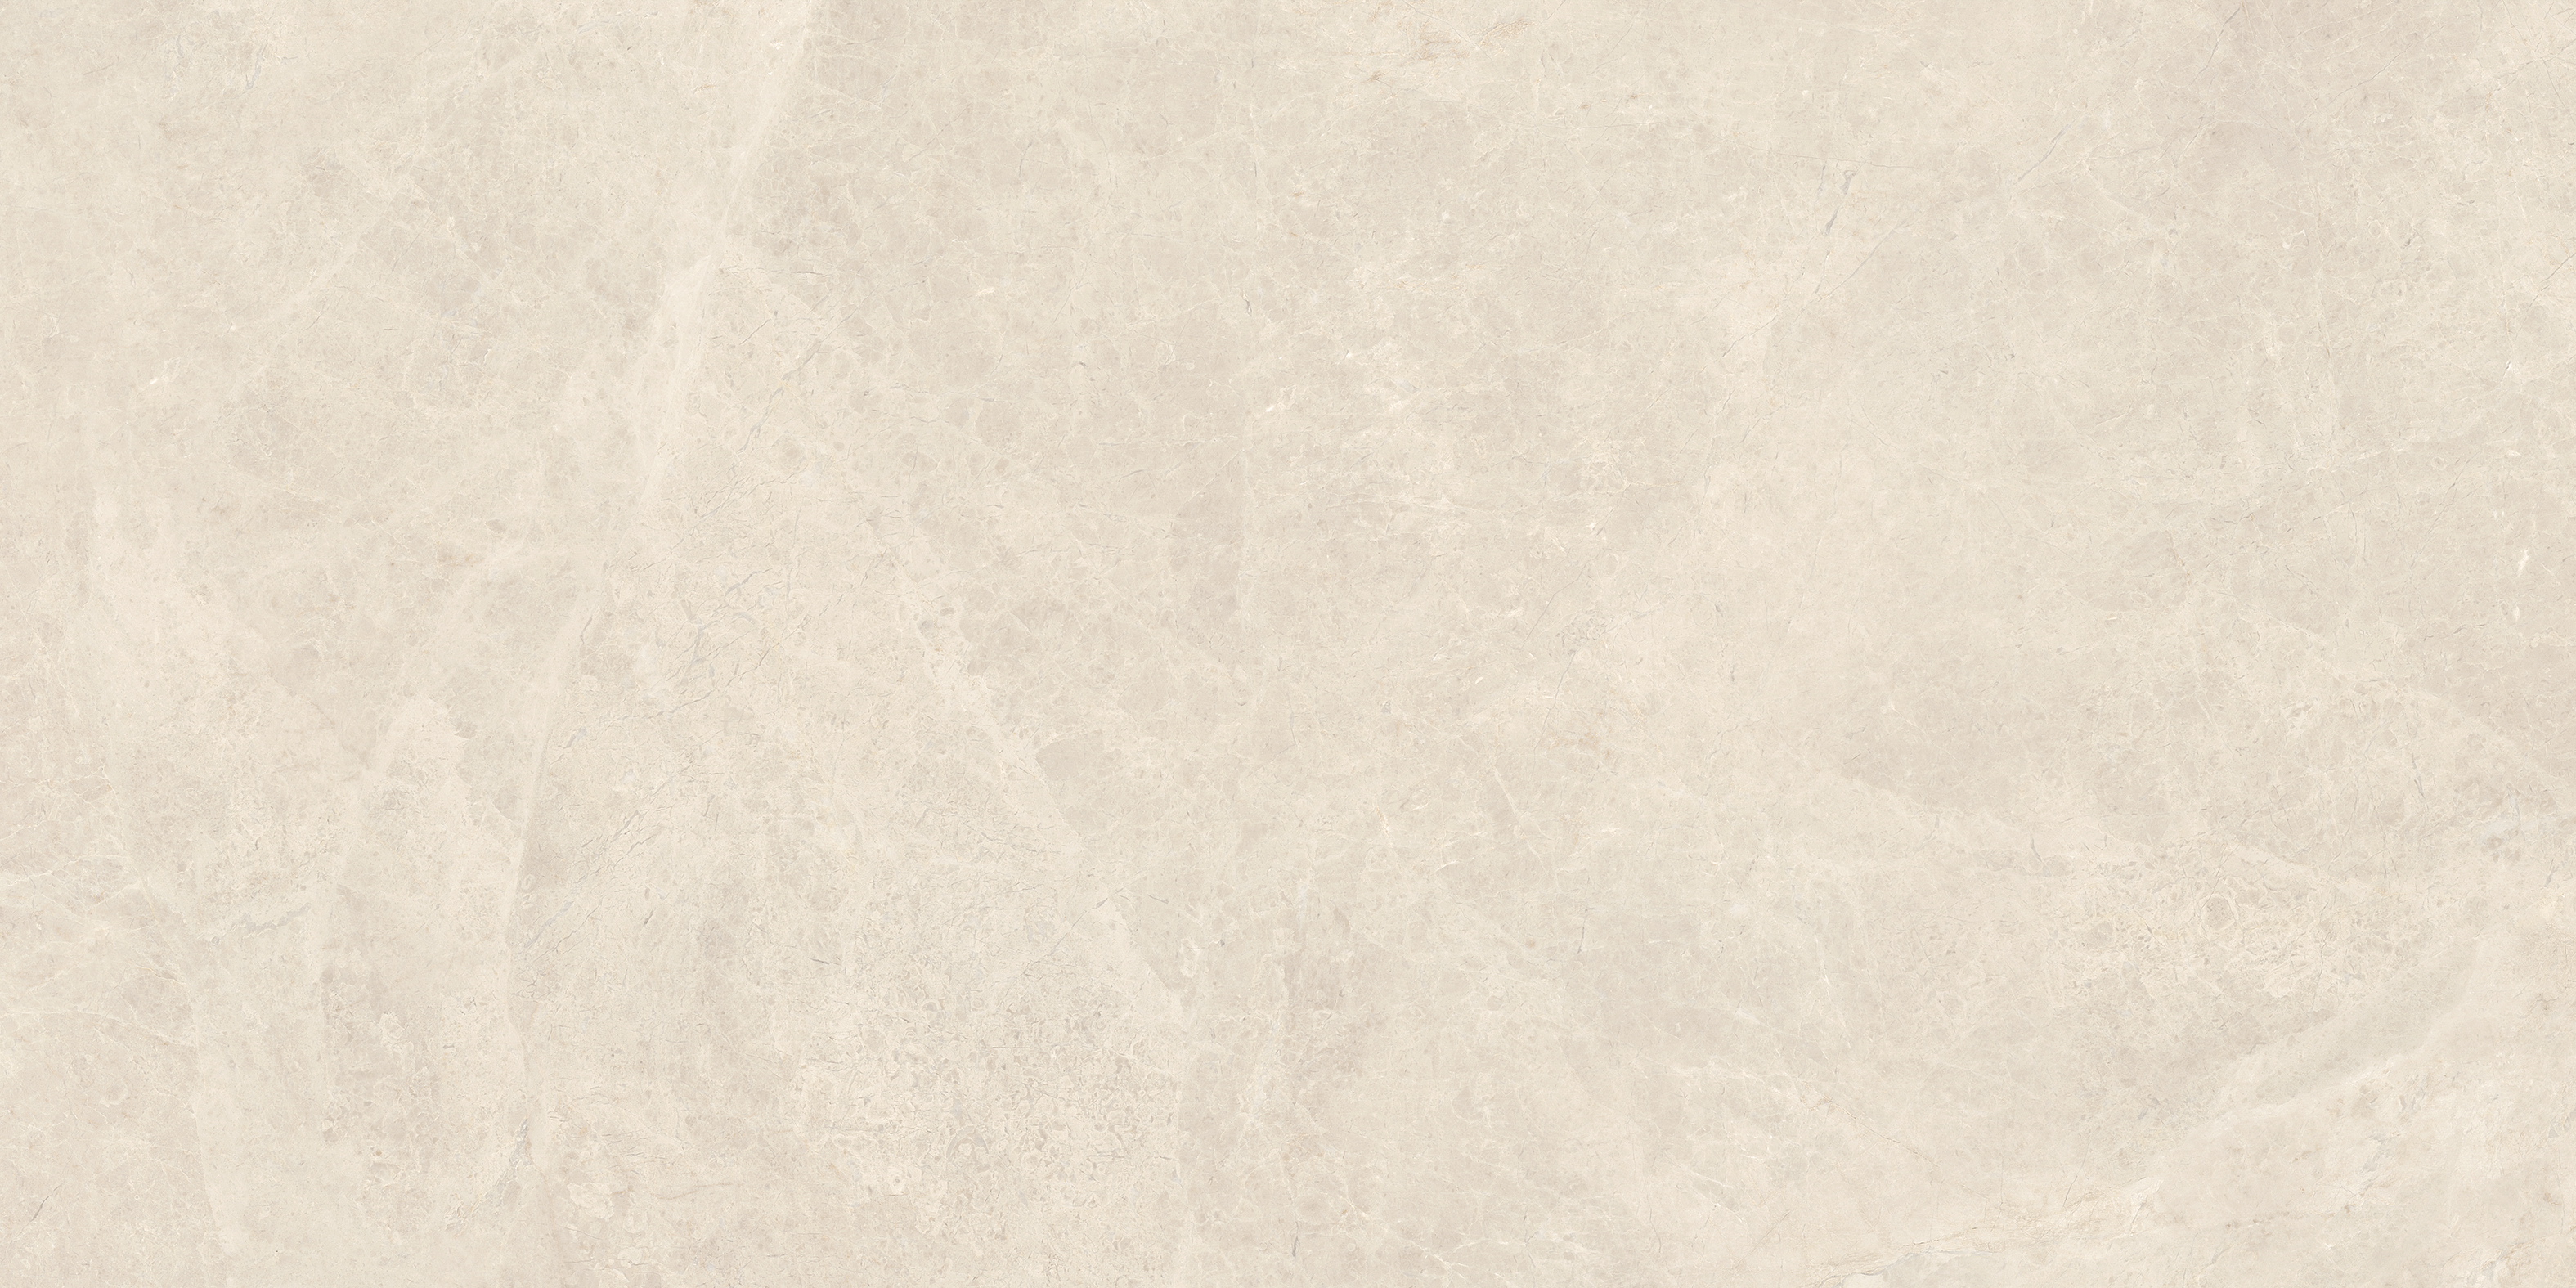 allure ivory pattern glazed porcelain field tile from mayfair anatolia collection distributed by surface group international polished finish rectified edge 16x32 rectangle shape